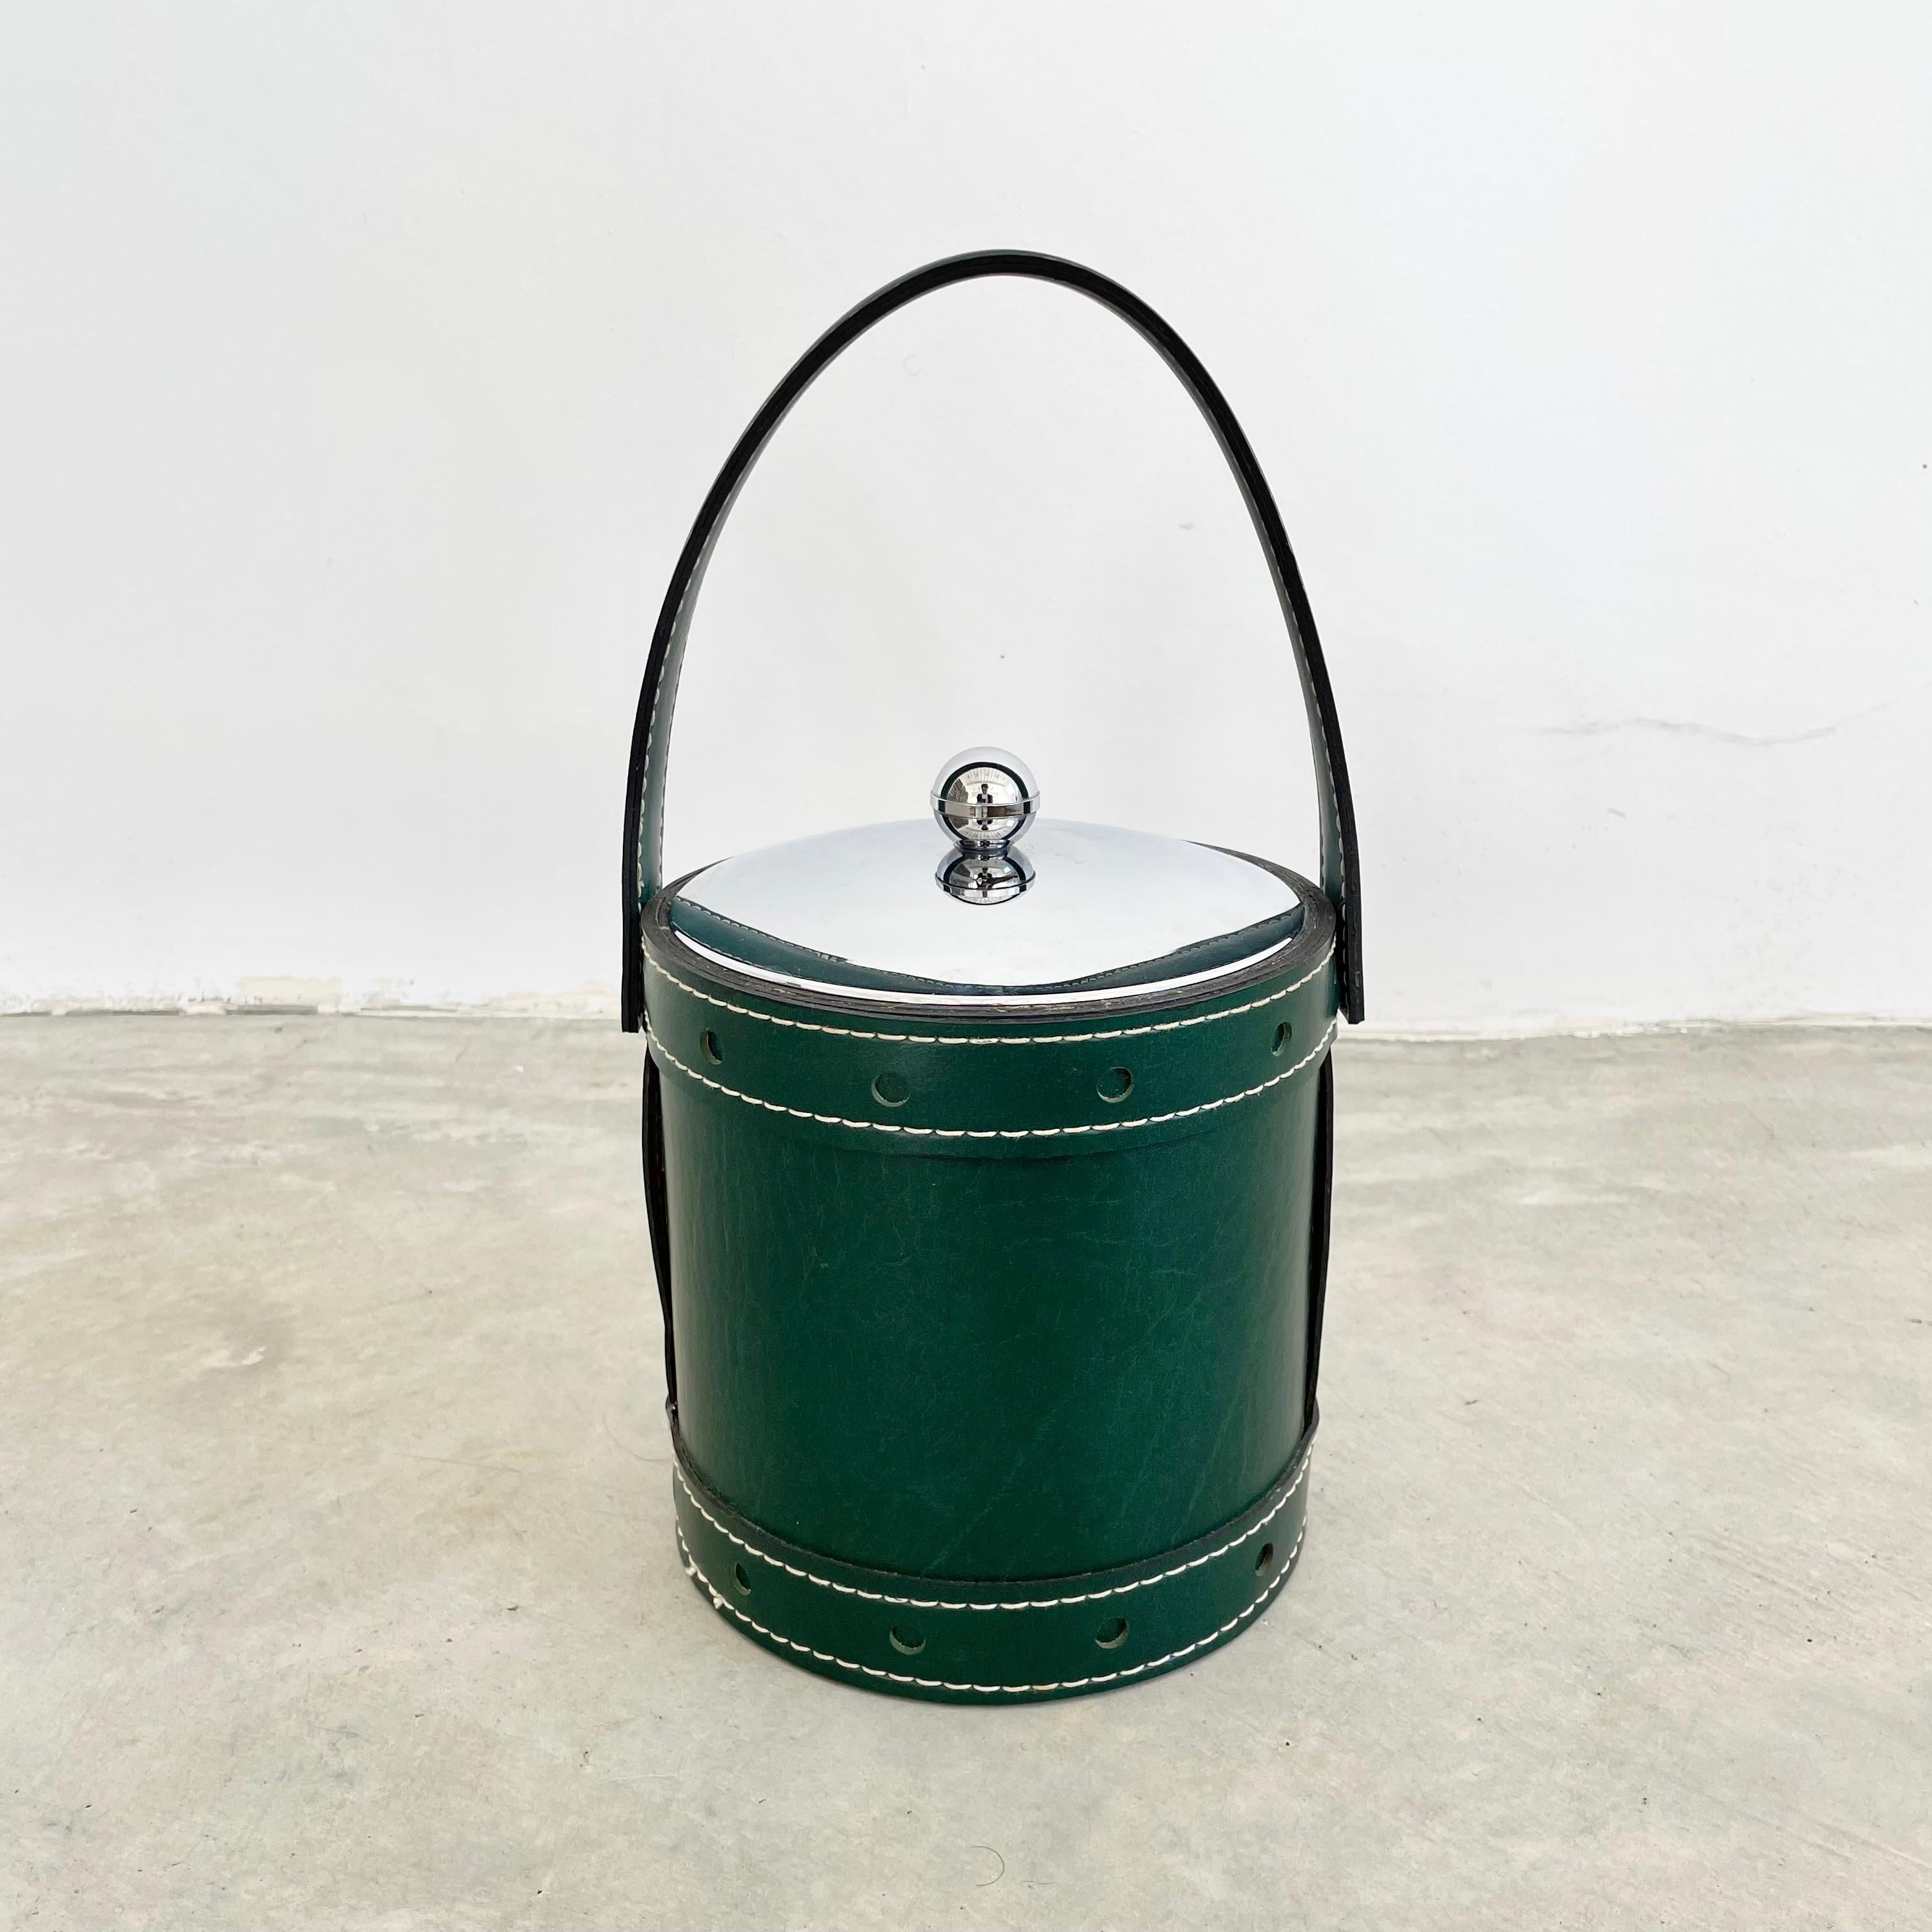 Unique petite champagne bucket/cooler in a beautiful emerald green skai material with silver plastic accents and a candy red interior plastic bucket to hold water/ice. Features a tasteful contrast stitch on every seam give this cooler an elevated